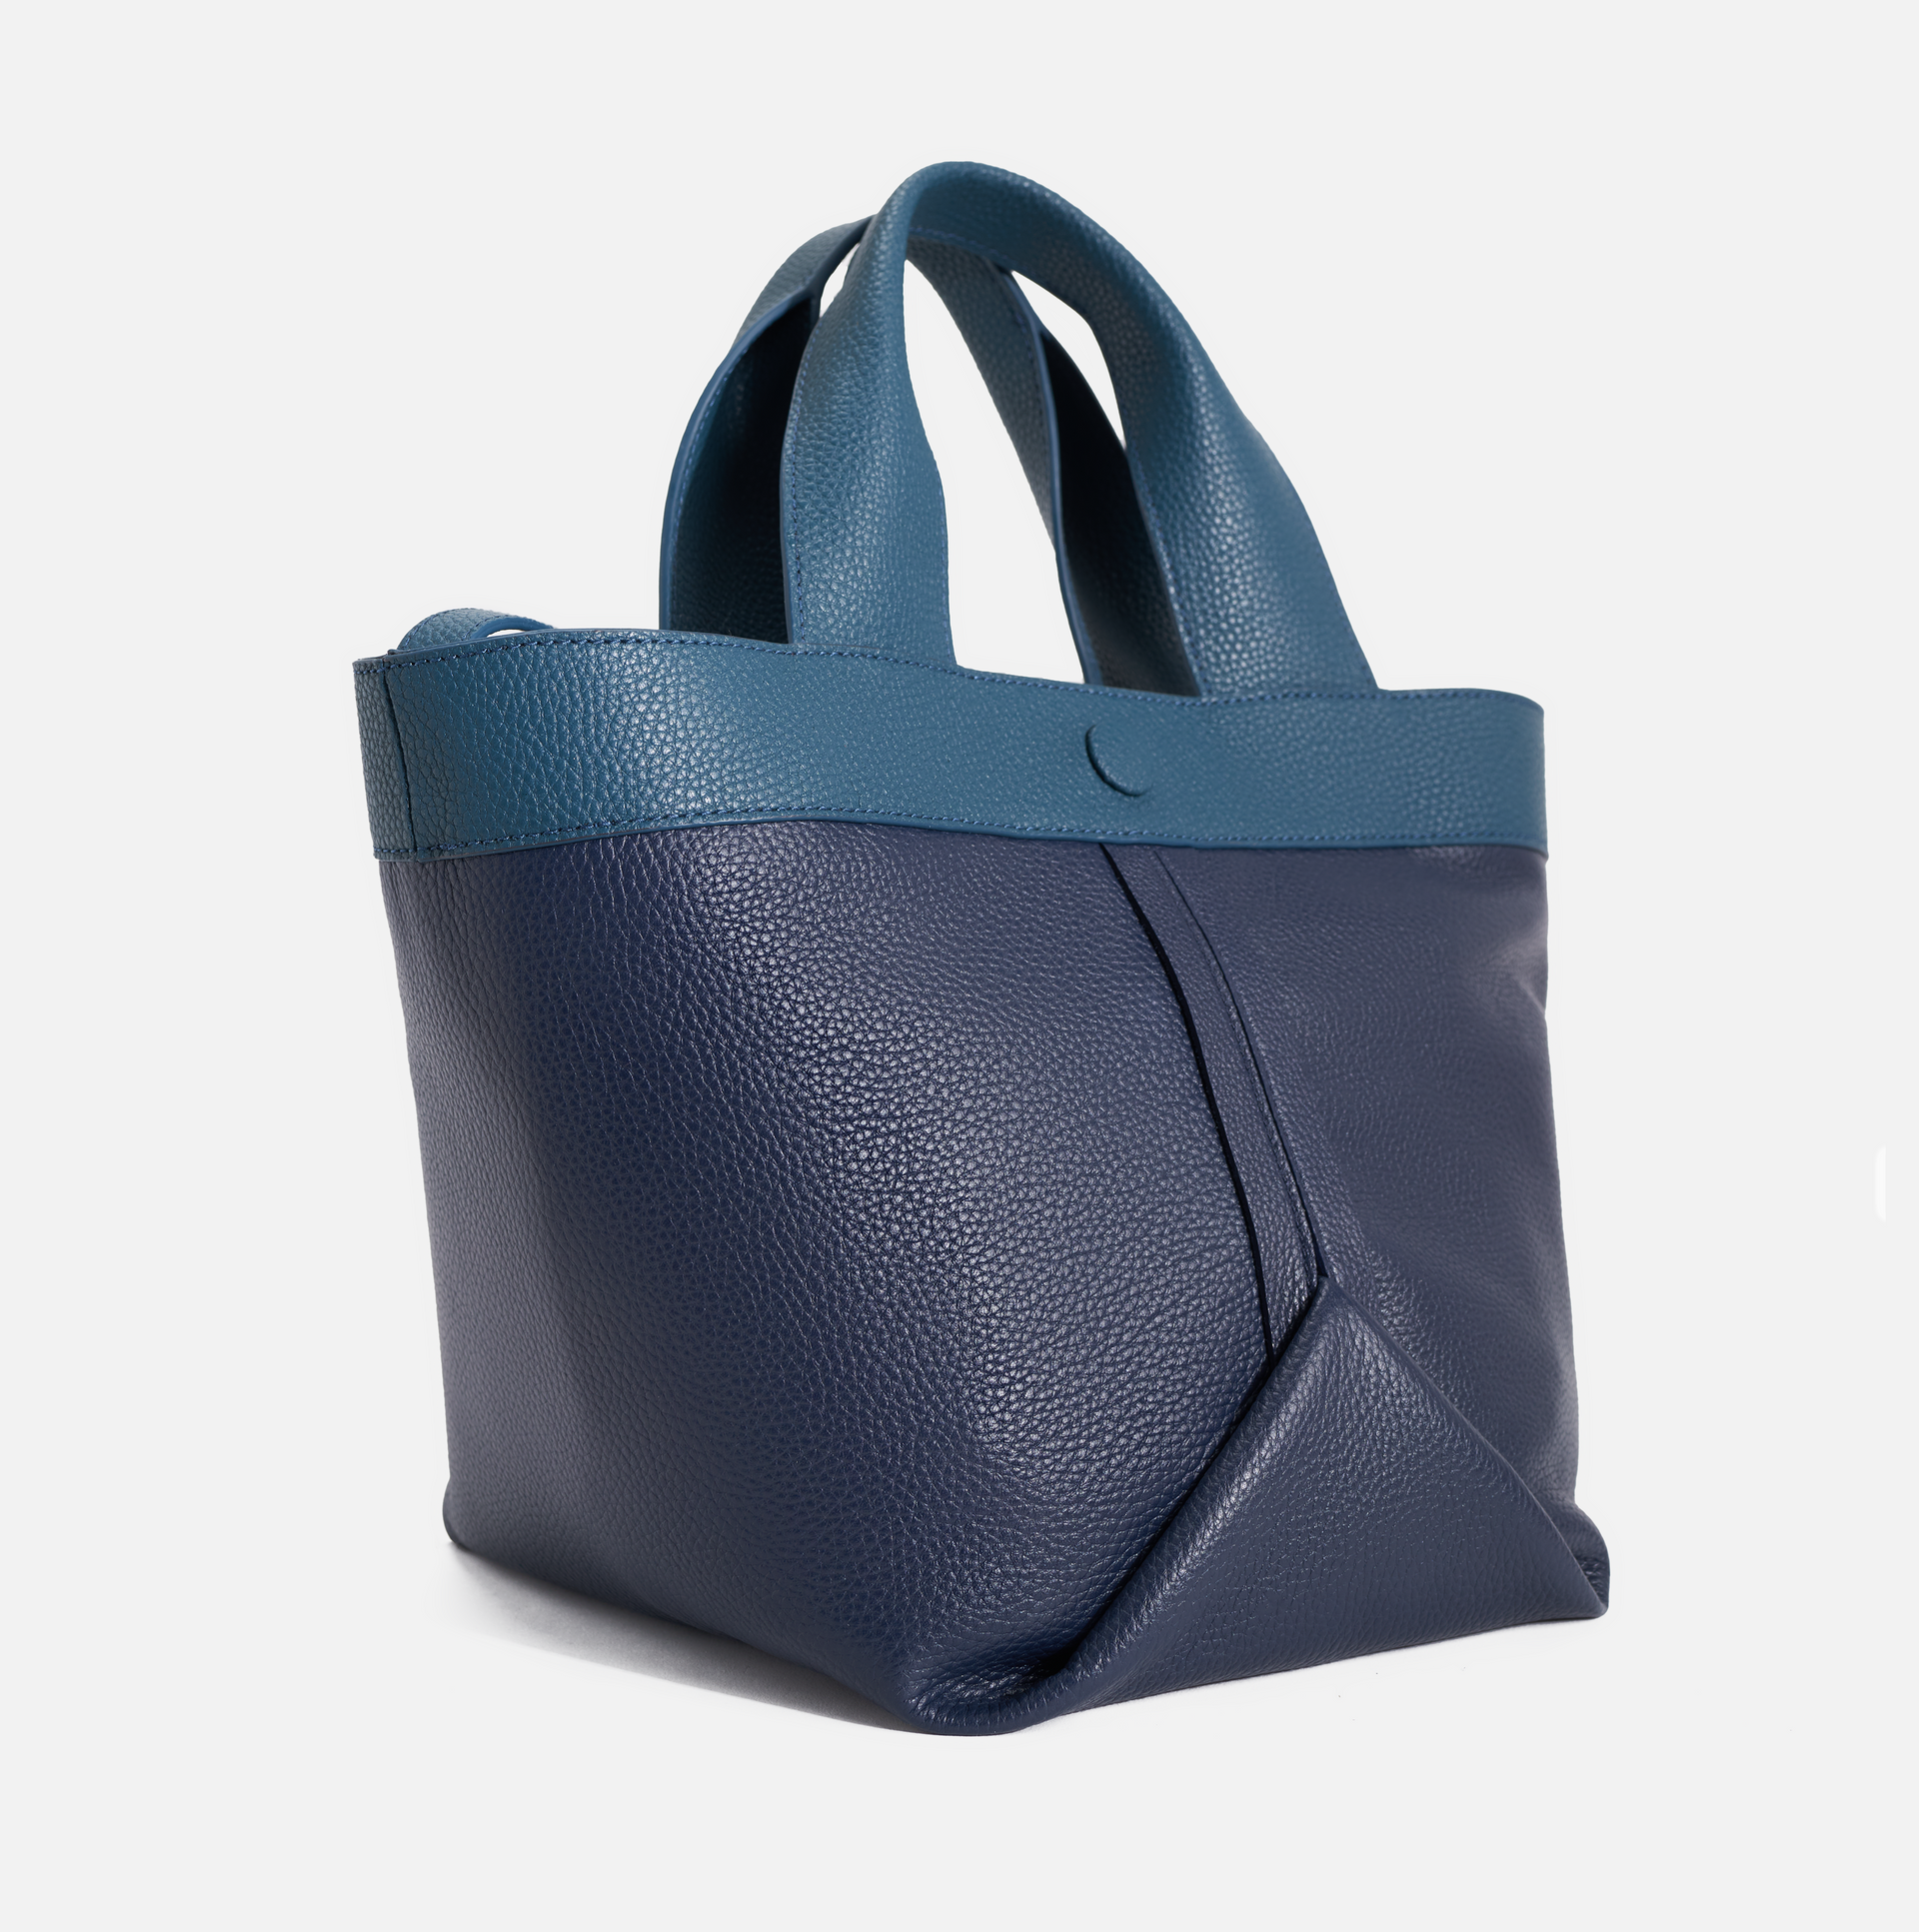 Gusset medium pebble leather tote in emerald forest / blazer blue